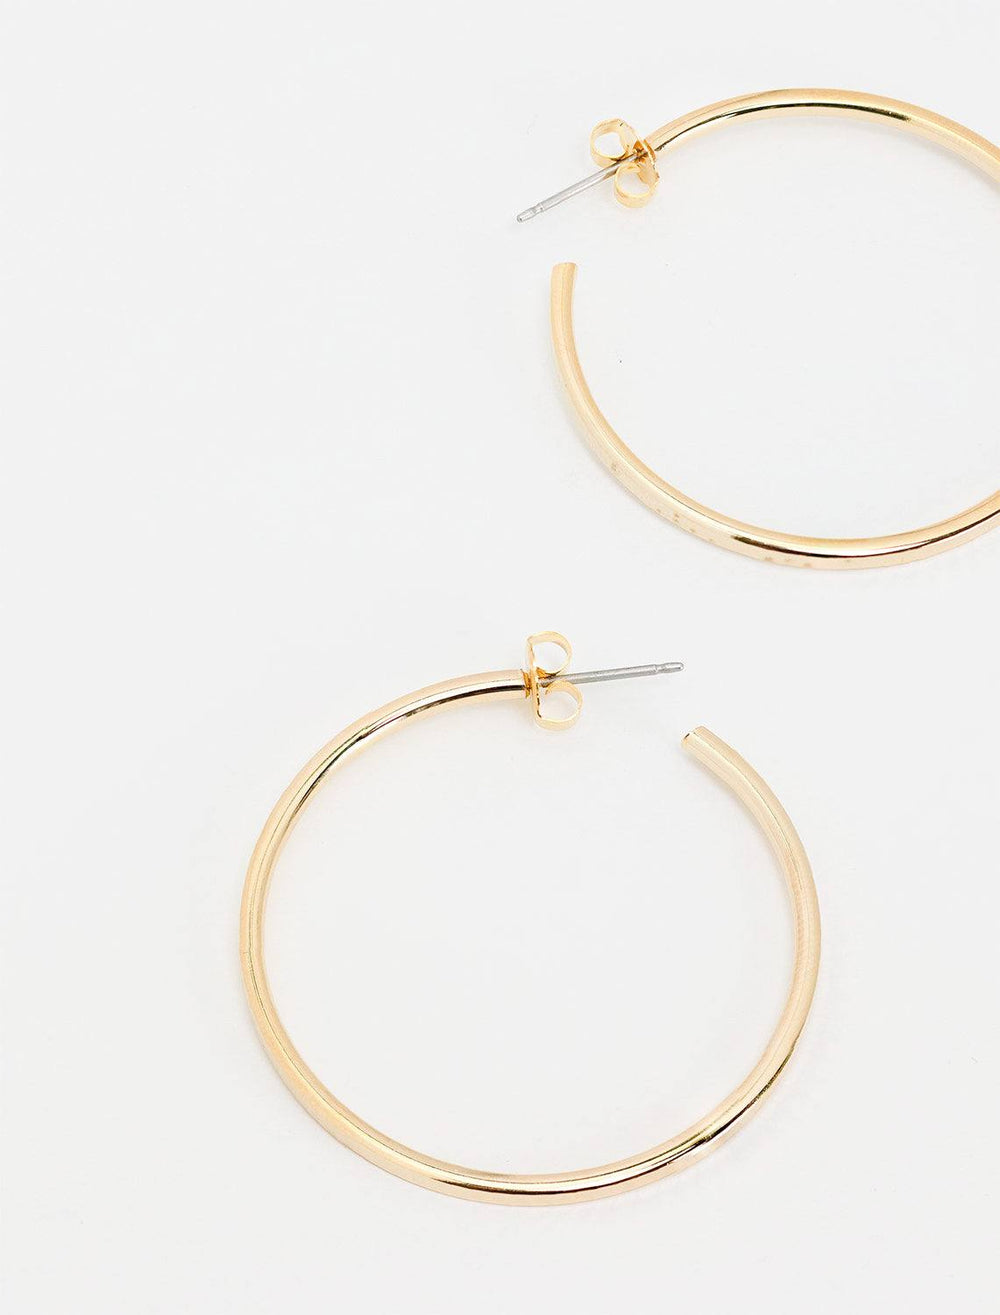 styled top down view of disco ball hoops in gold